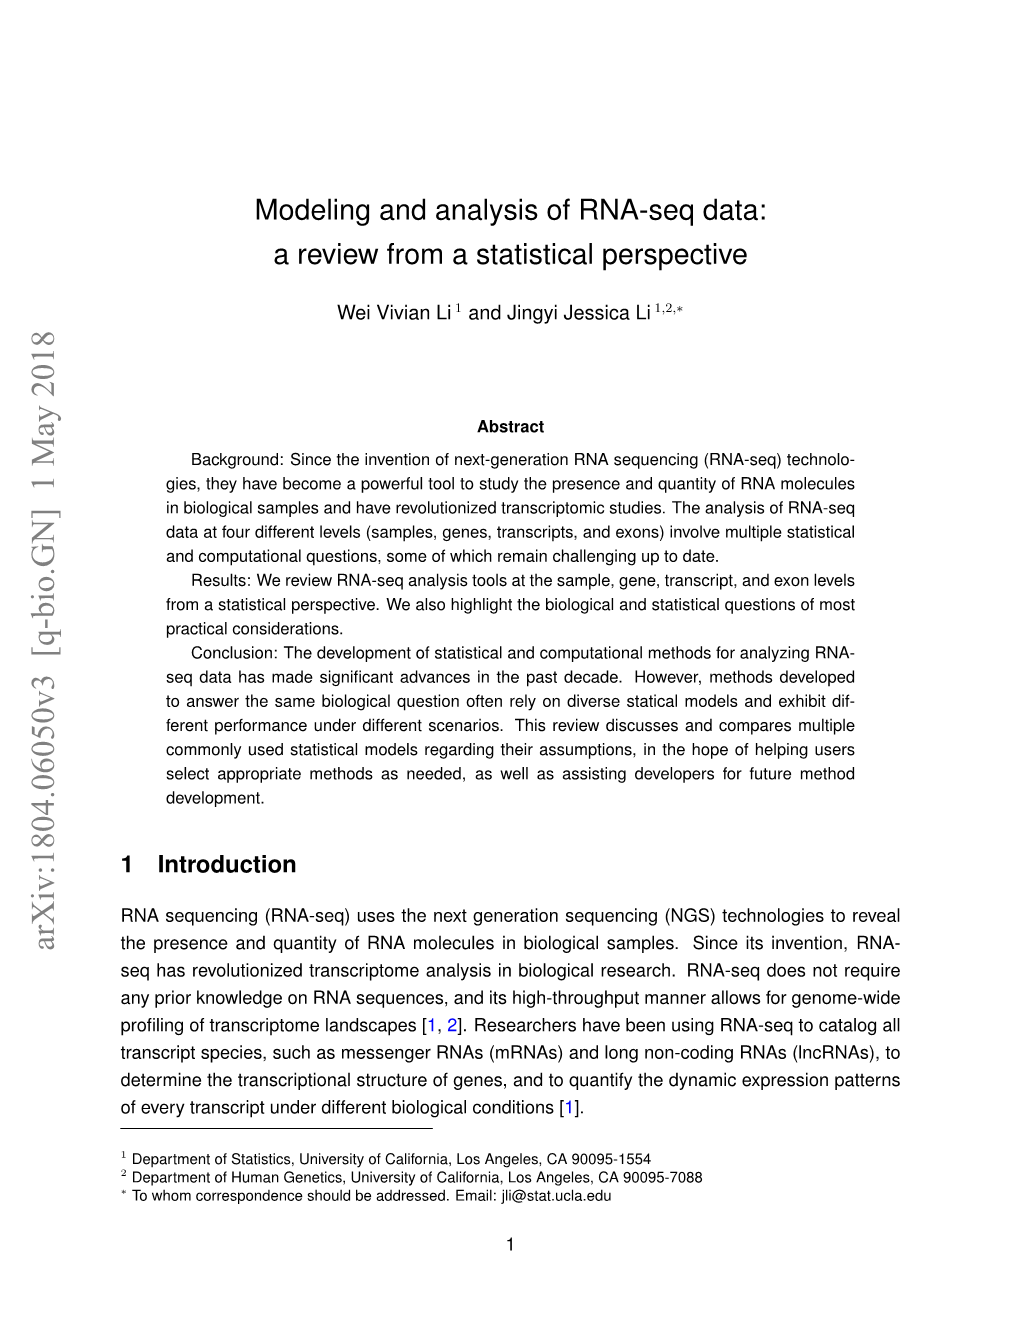 Modeling and Analysis of RNA-Seq Data: a Review from a Statistical Perspective